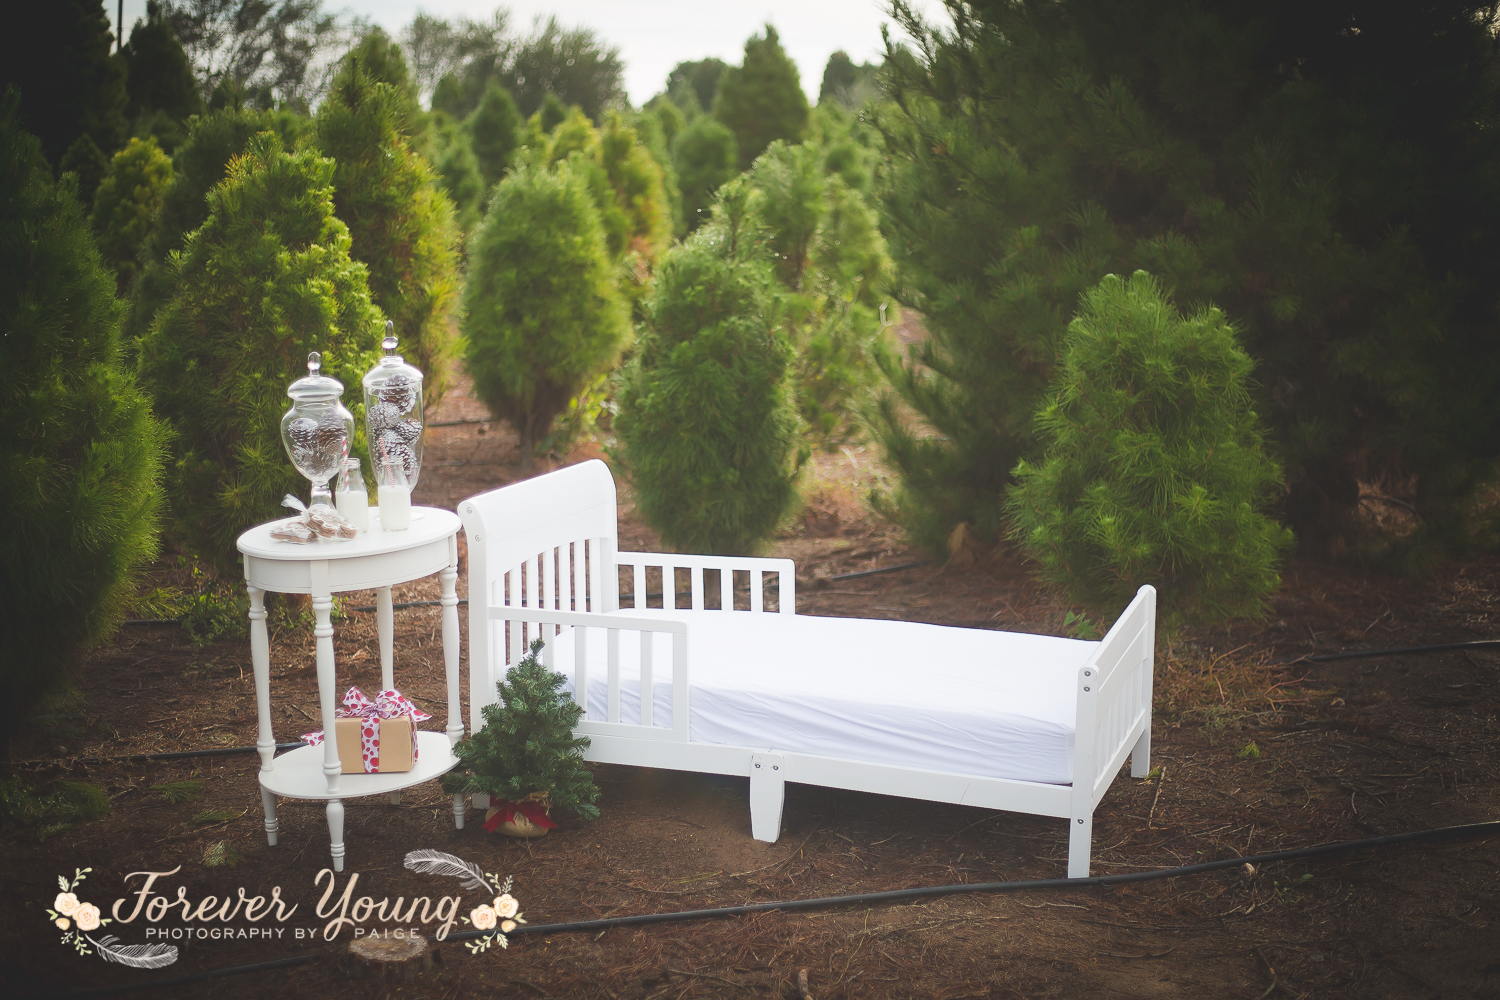 San Diego Christmas Tree Farm Photoshoot | Forever Young Photography By Paige-7